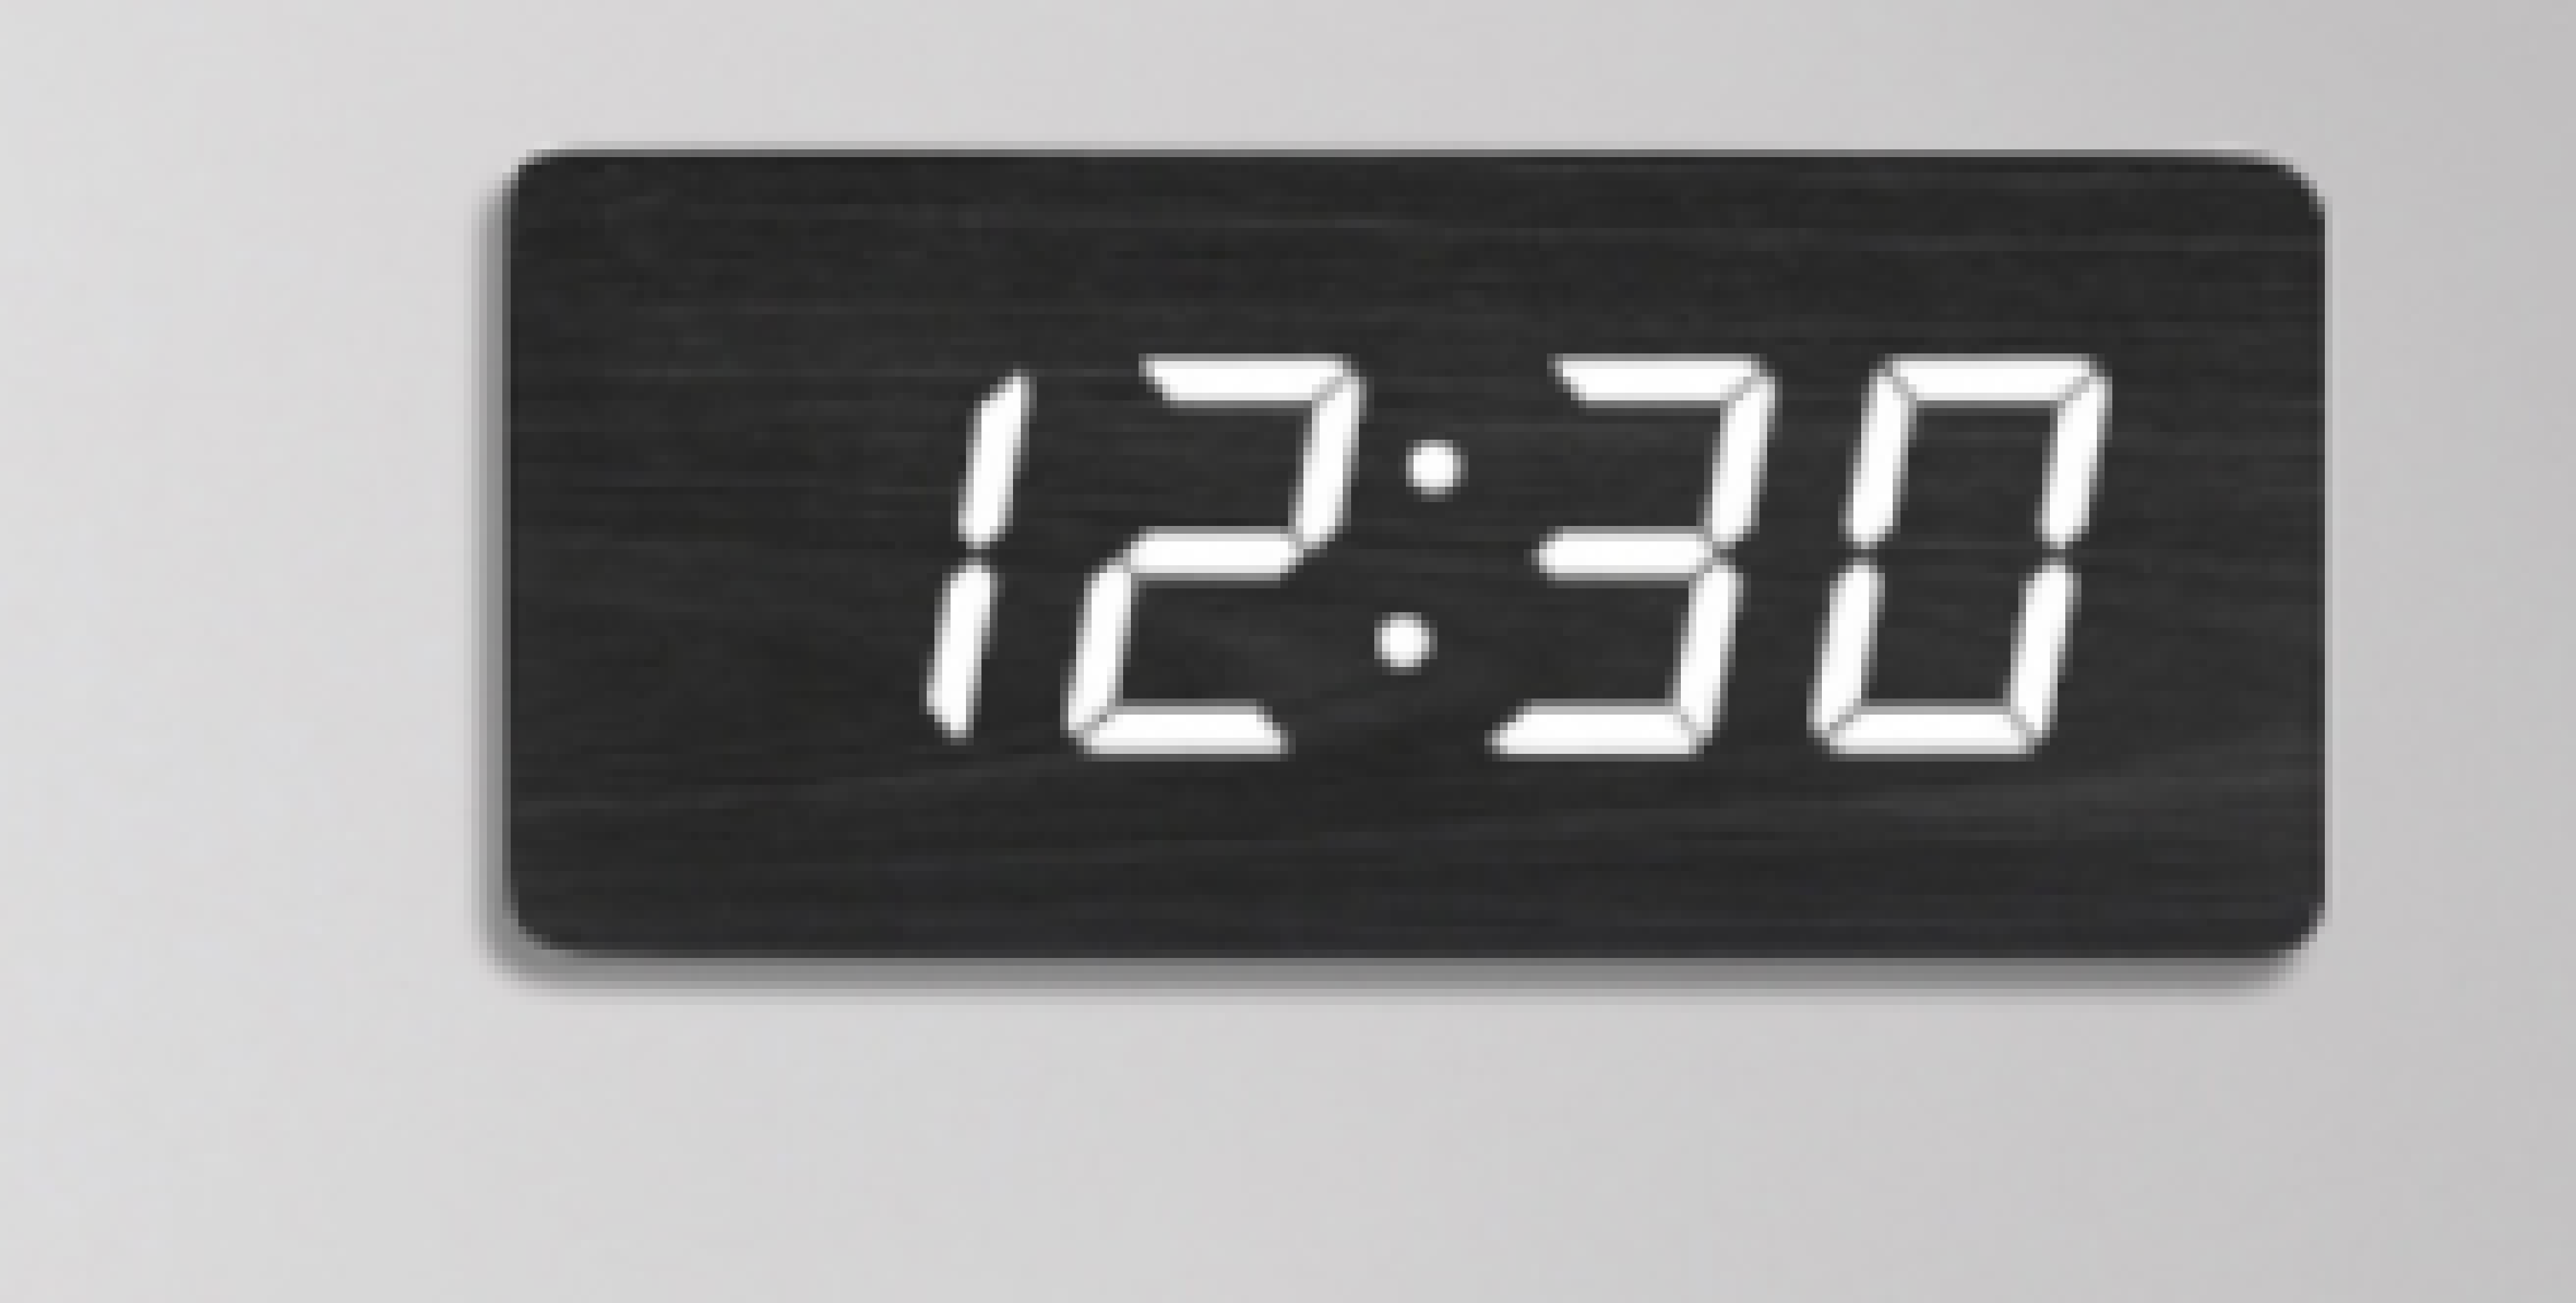 Lazy silent LED wall clock, sound-controlled wood clock, home decoration wall clock